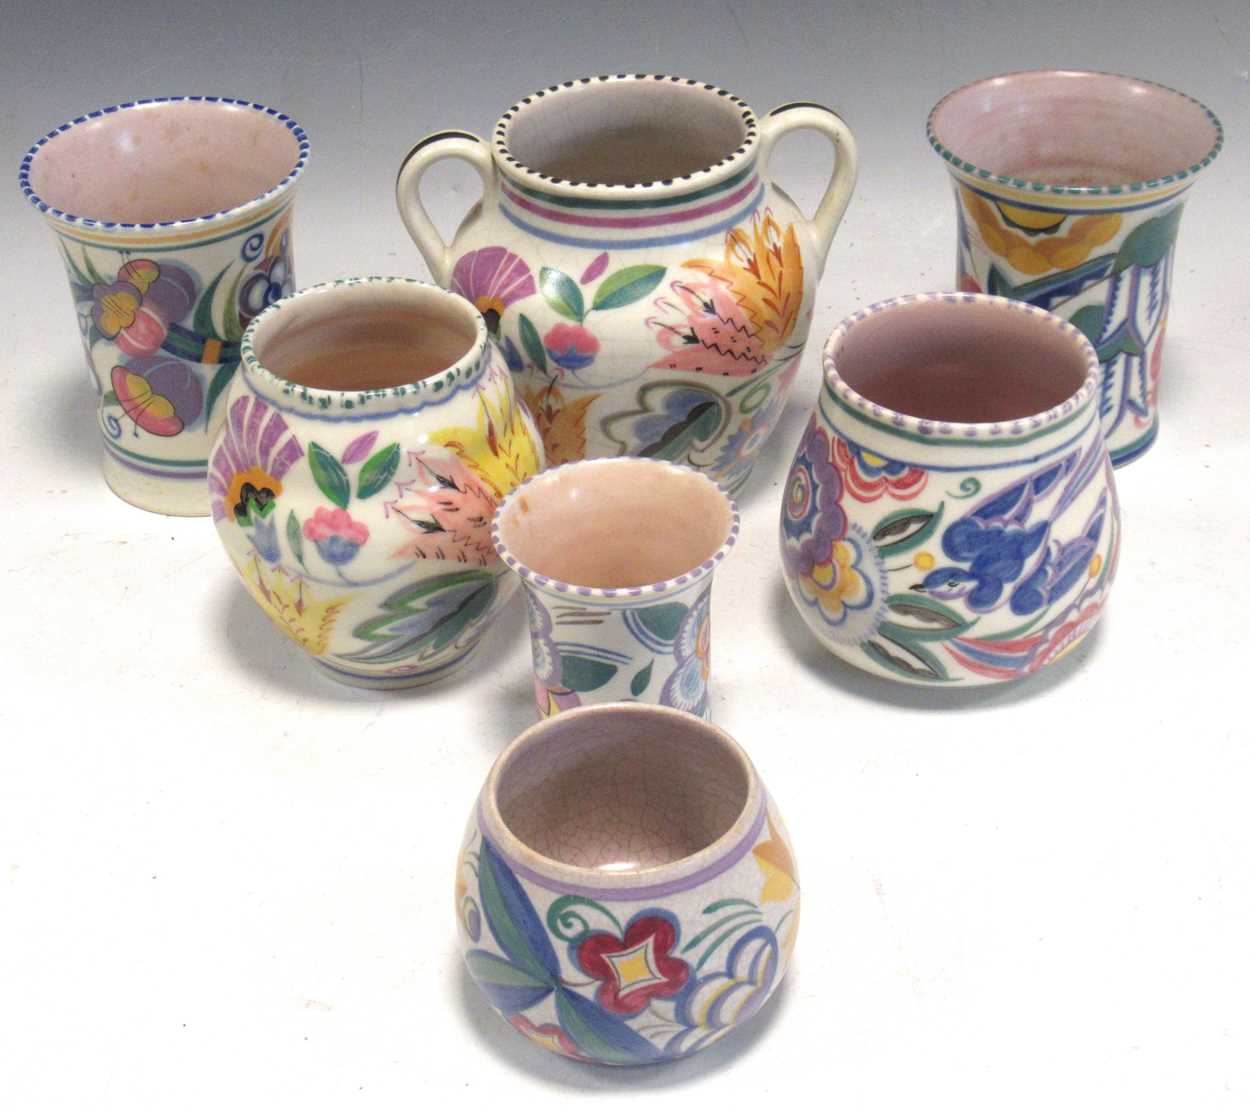 Seven Poole Pottery vases, one with two handles, tallest 13cm high (7)